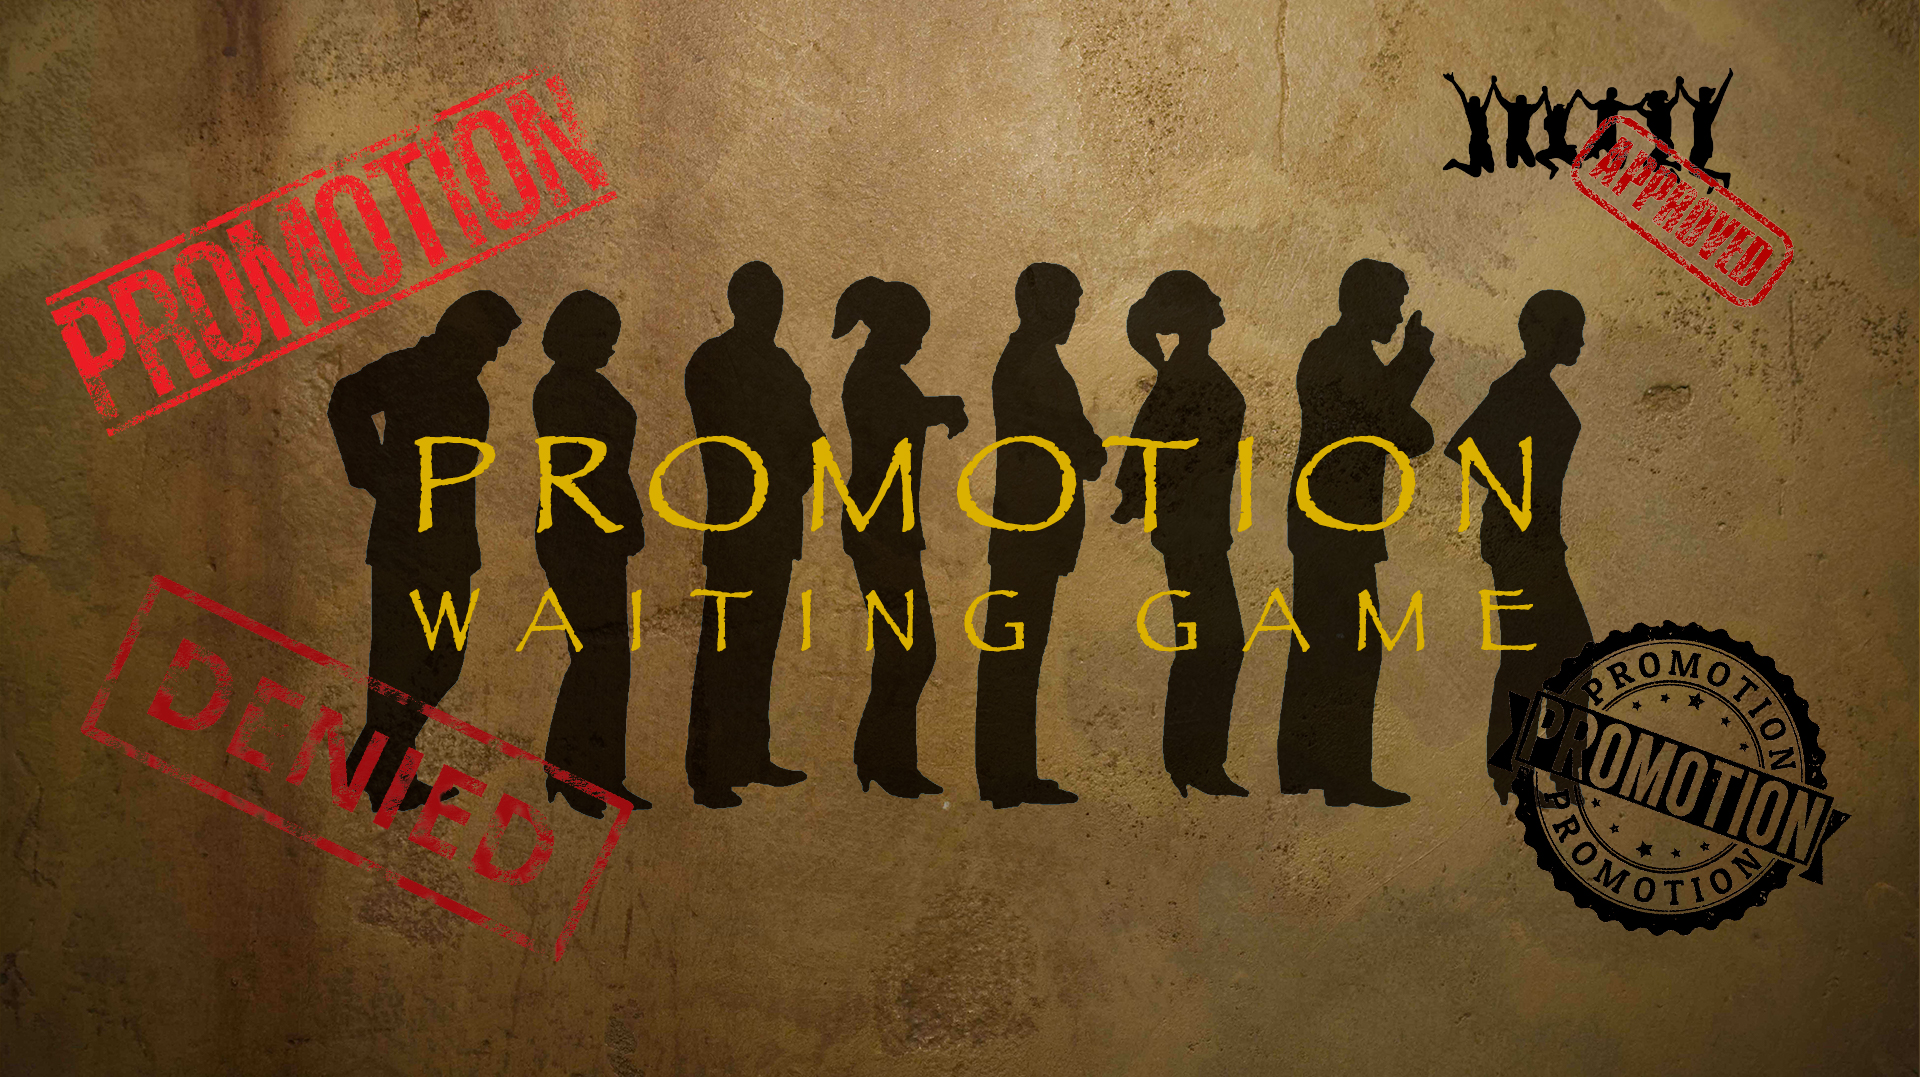 The Promotion Waiting Game